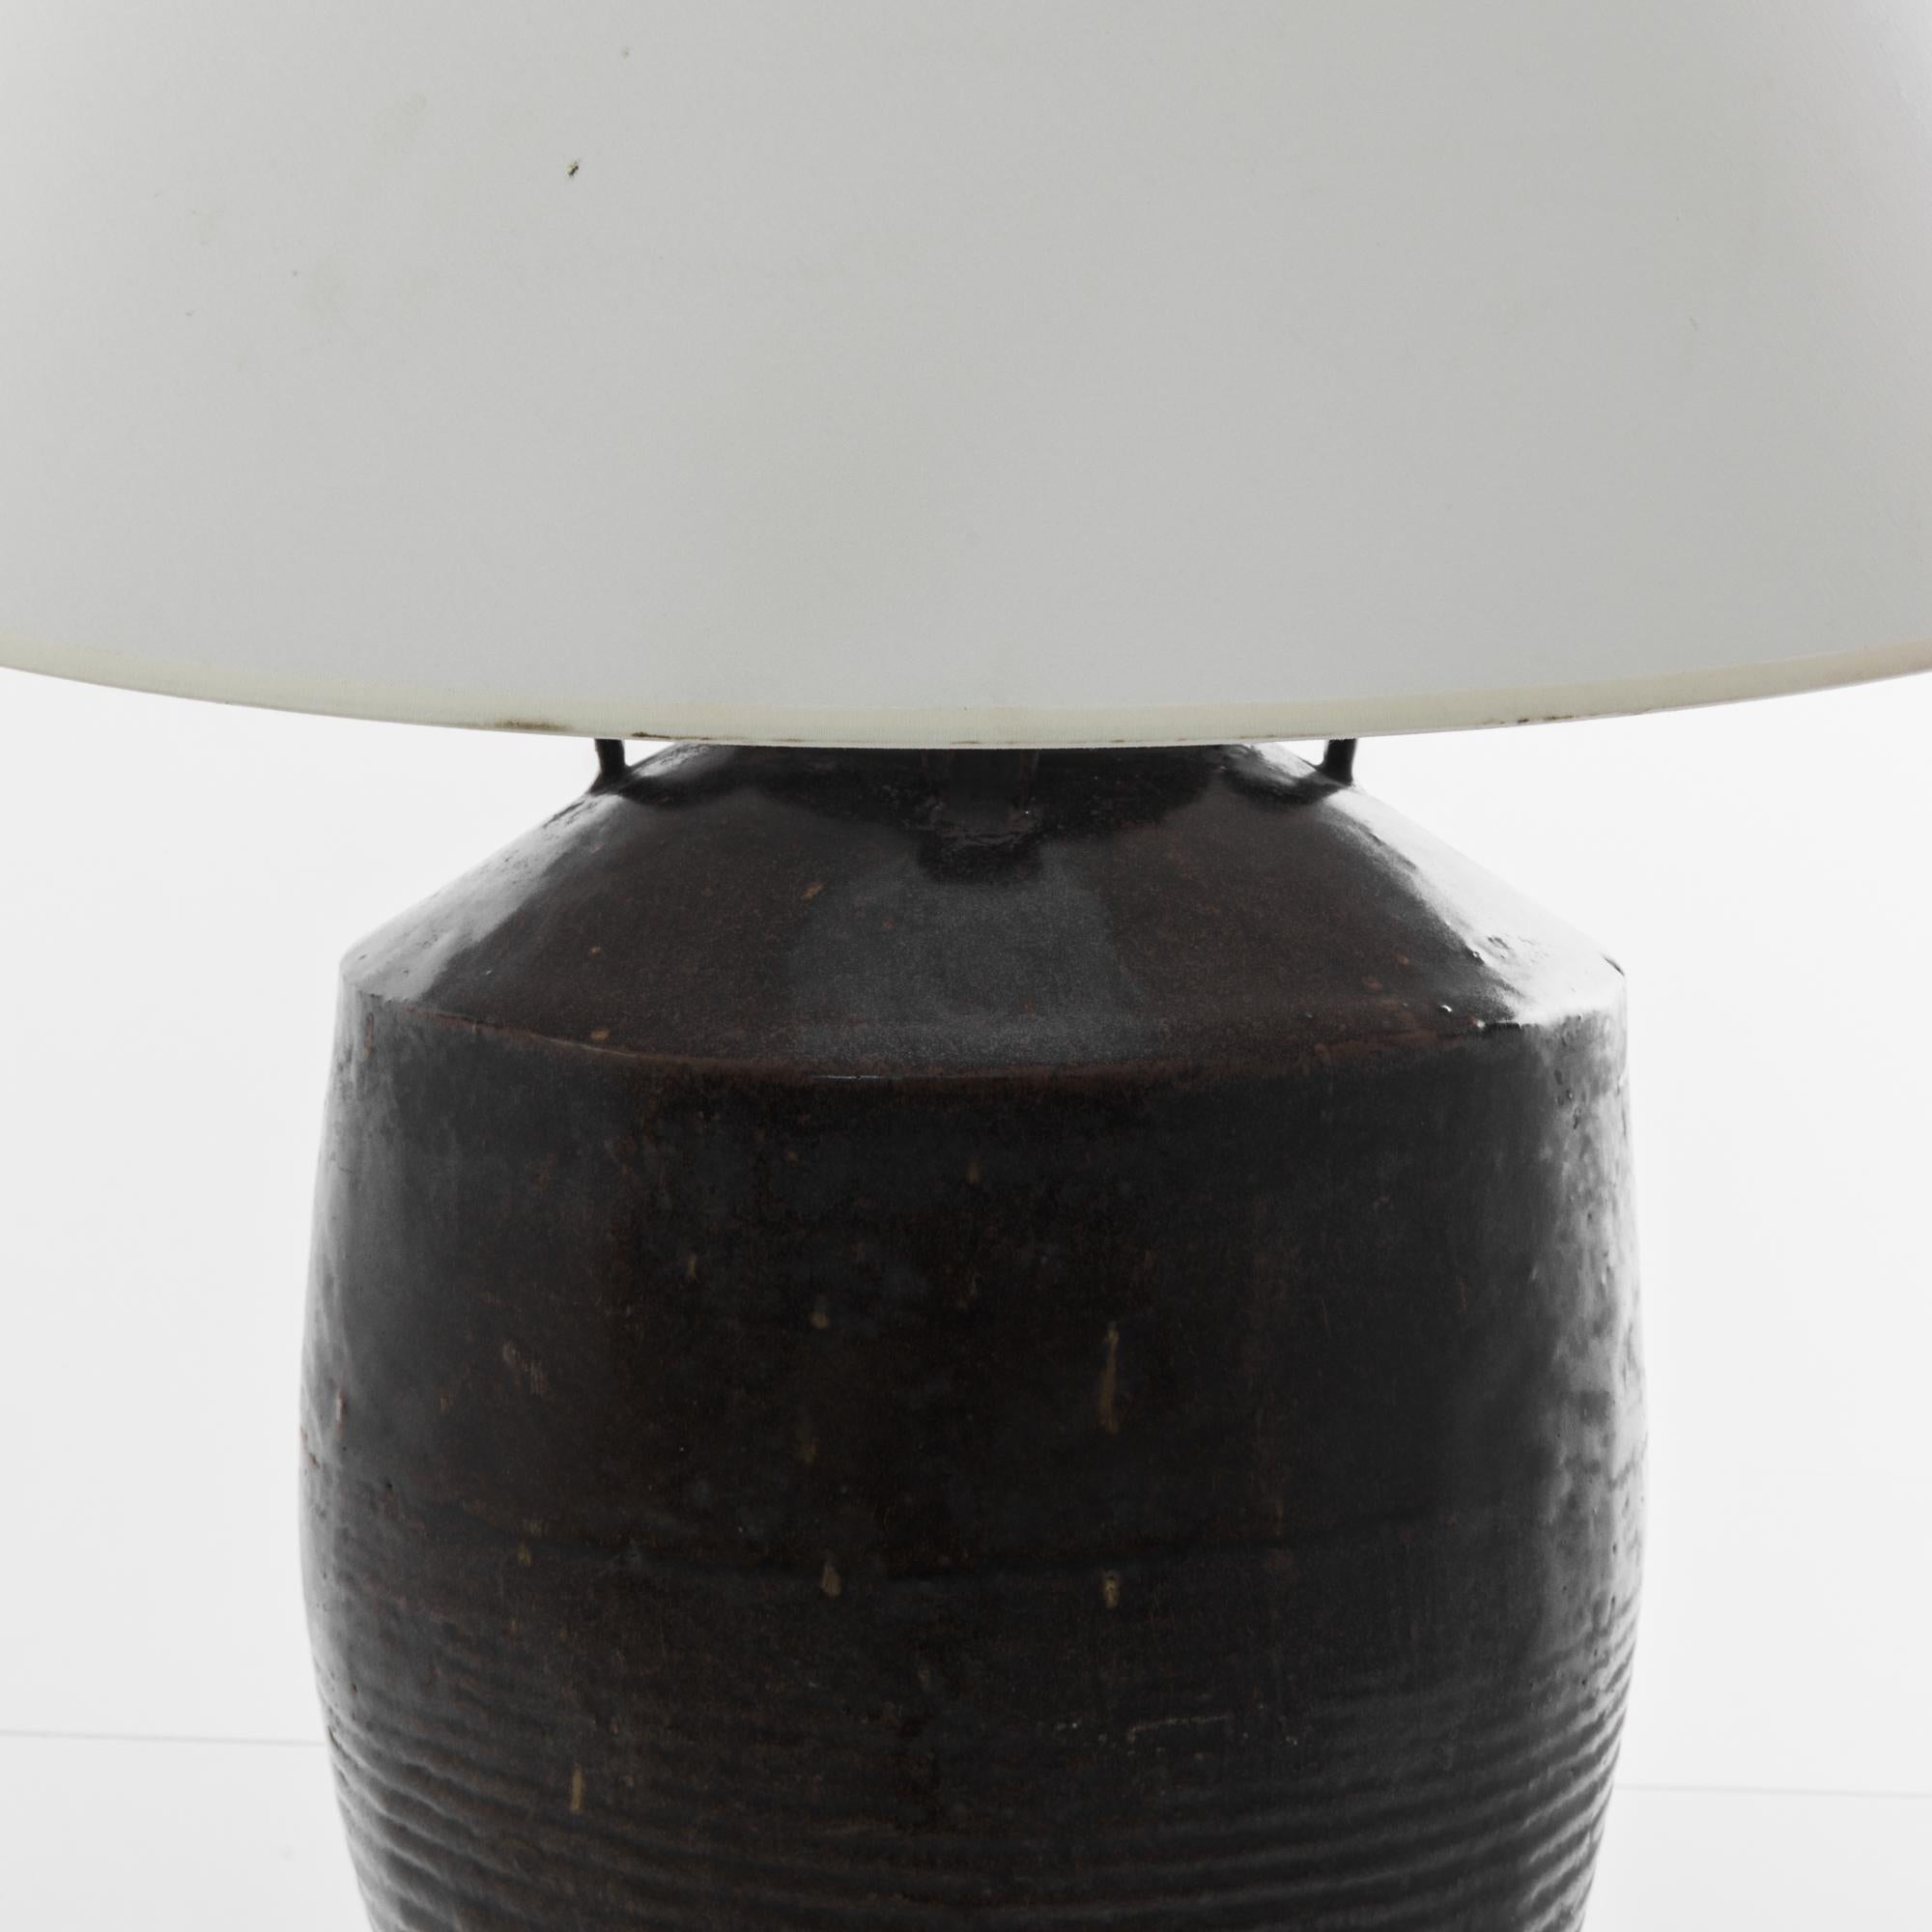 A vintage Chinese vase, fitted with an adjustable brass fixture and E26 lighting socket. The deep tone of the earthy black glaze creates a vivid visual impact. Textured glazes, attractive colors and rippling pattern grants a sensuous tactility to